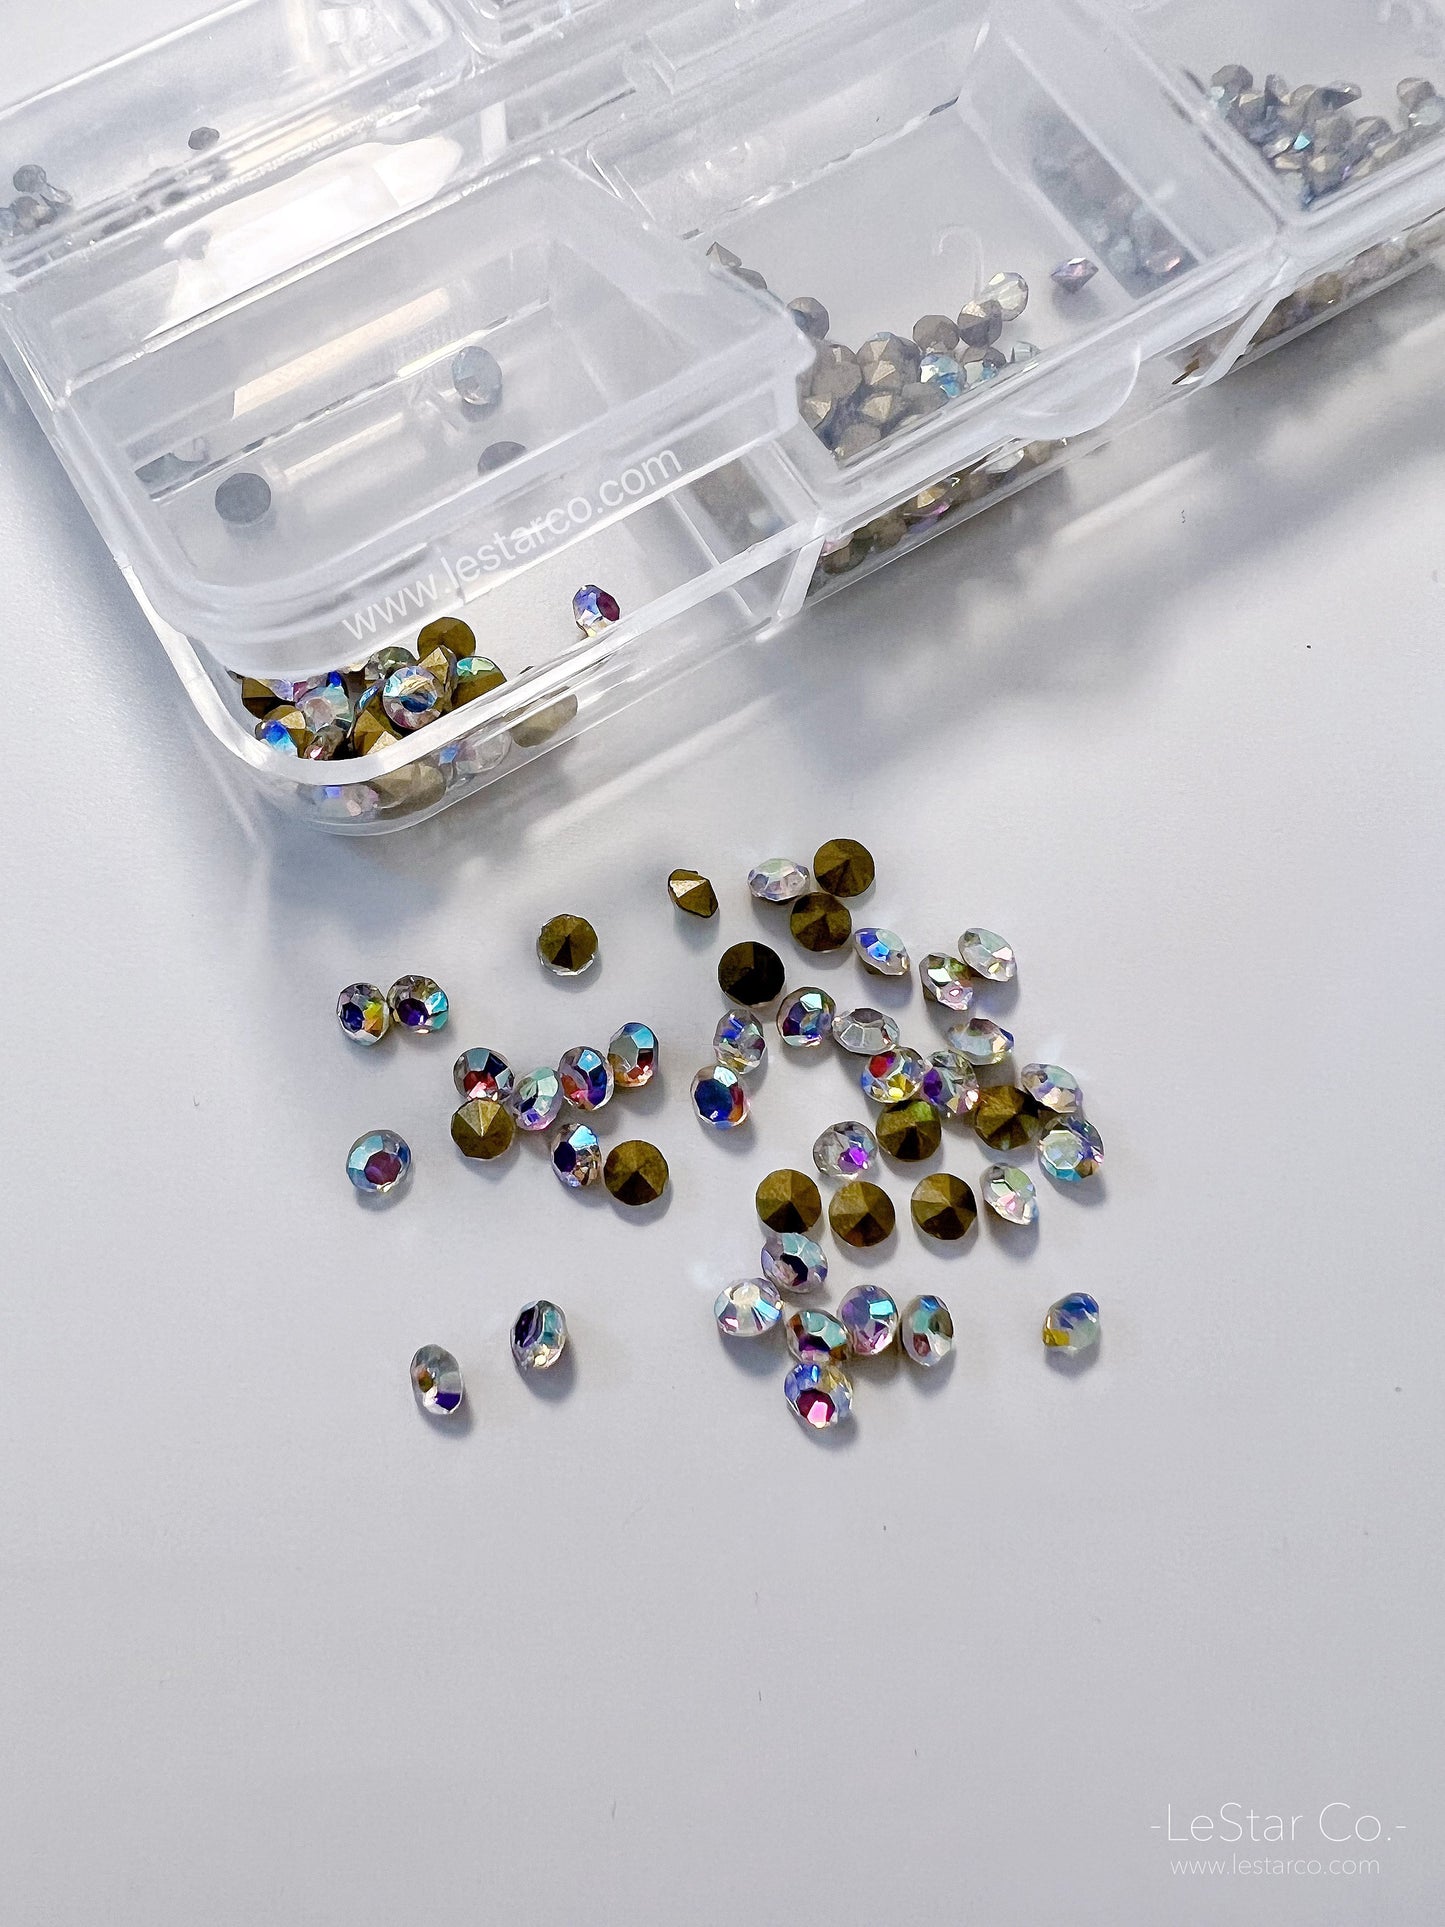 1000pcs Mixed sizes Pointed Back Rhinestones Diamond Crystal Gem stones Clear AB Diamonds Sequins 3D Nail Design Decorations DIY Accessories